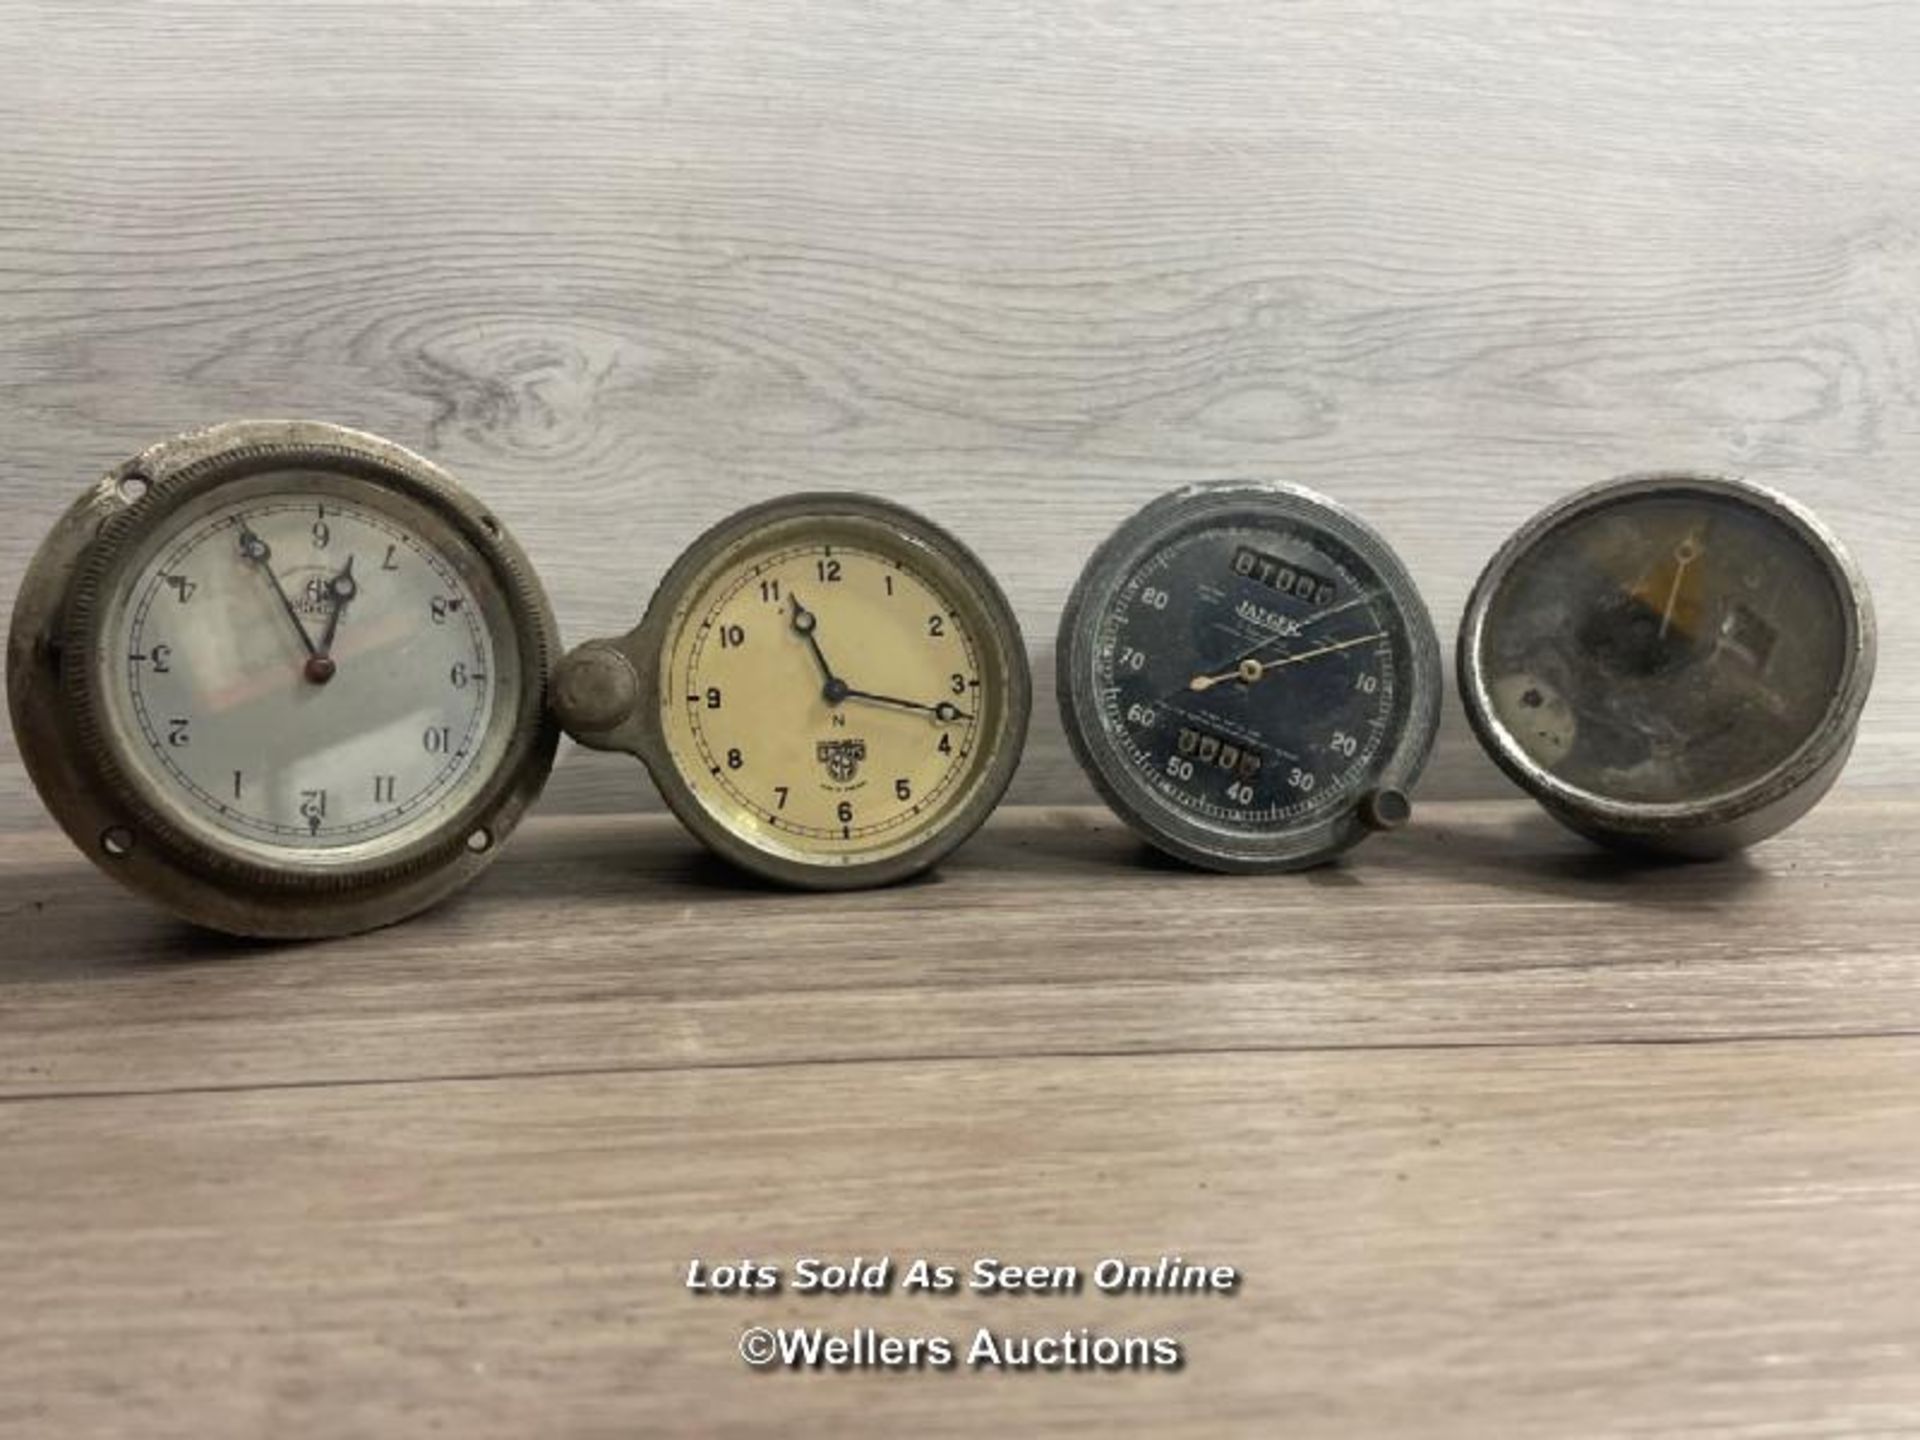 VINTAGE AUTOMOTIVE - FOUR VINTAGE SPEEDOMETERS & ODOMETERS INCLUDING JAEGER AND SMITHS